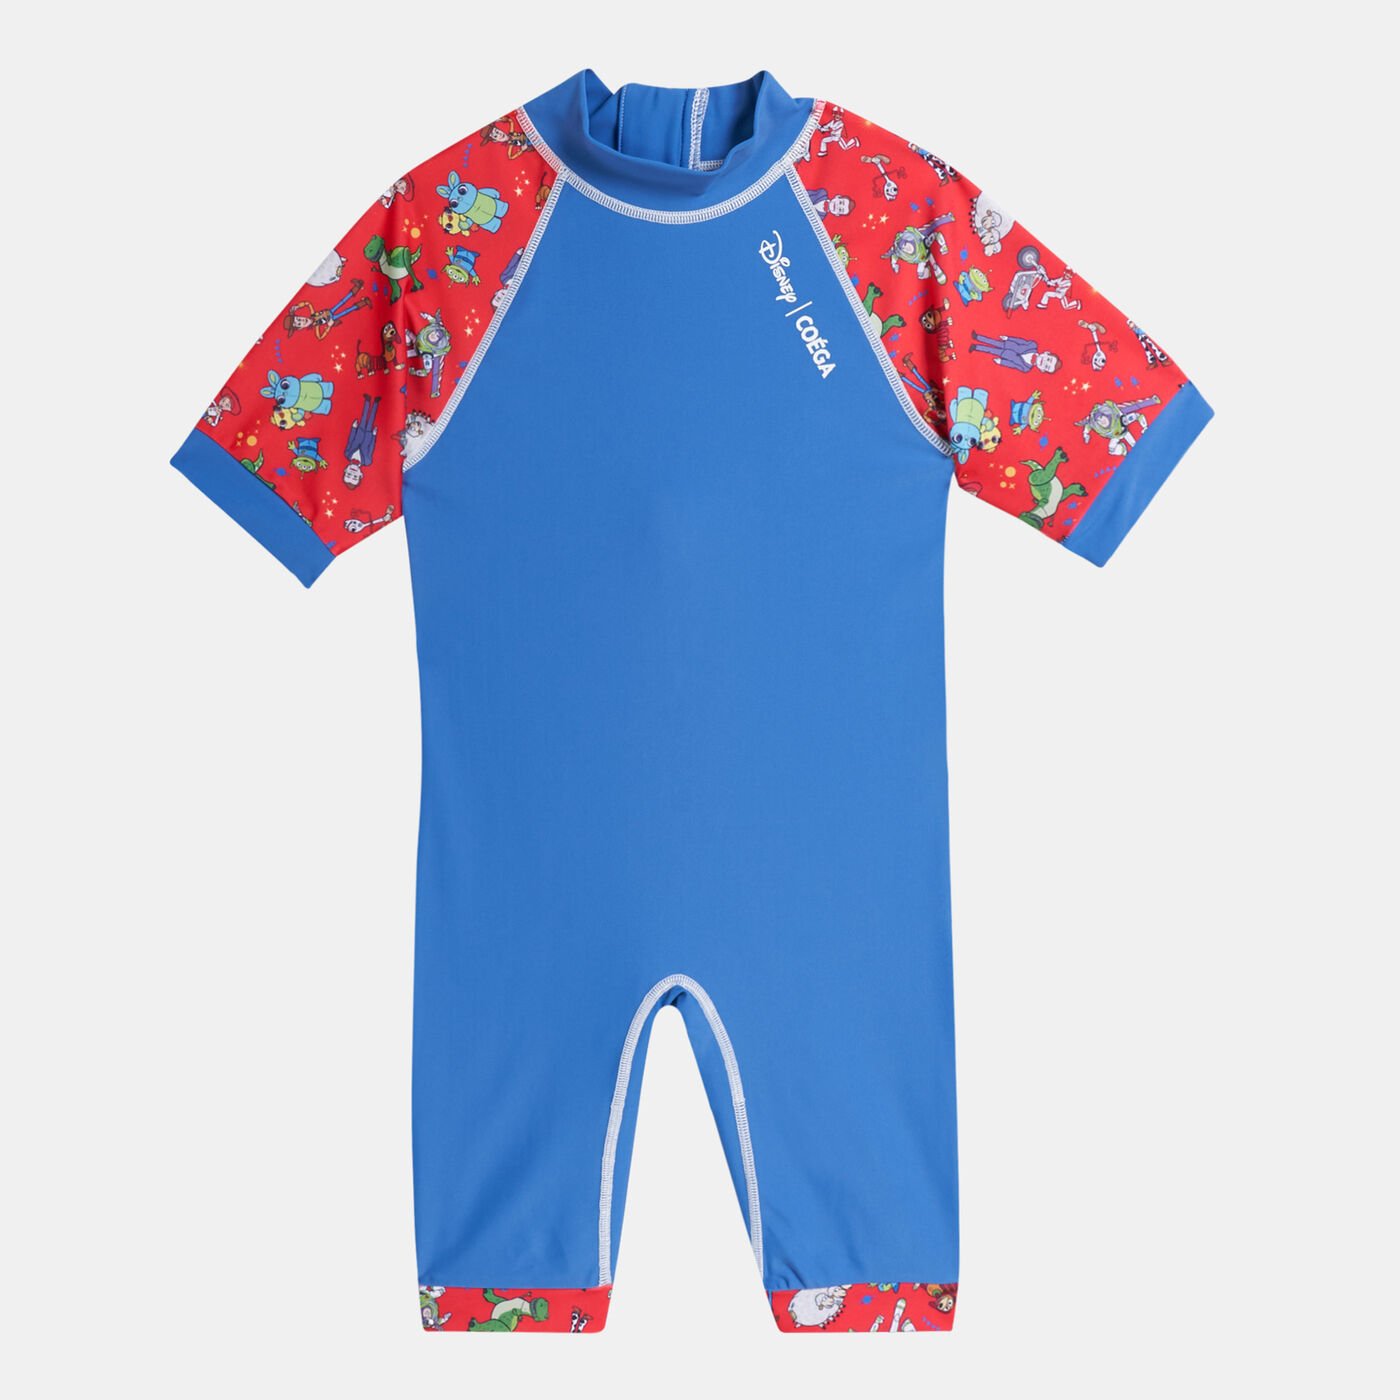 Kids' One Piece Toy Story Swimsuit (Younger Kids)